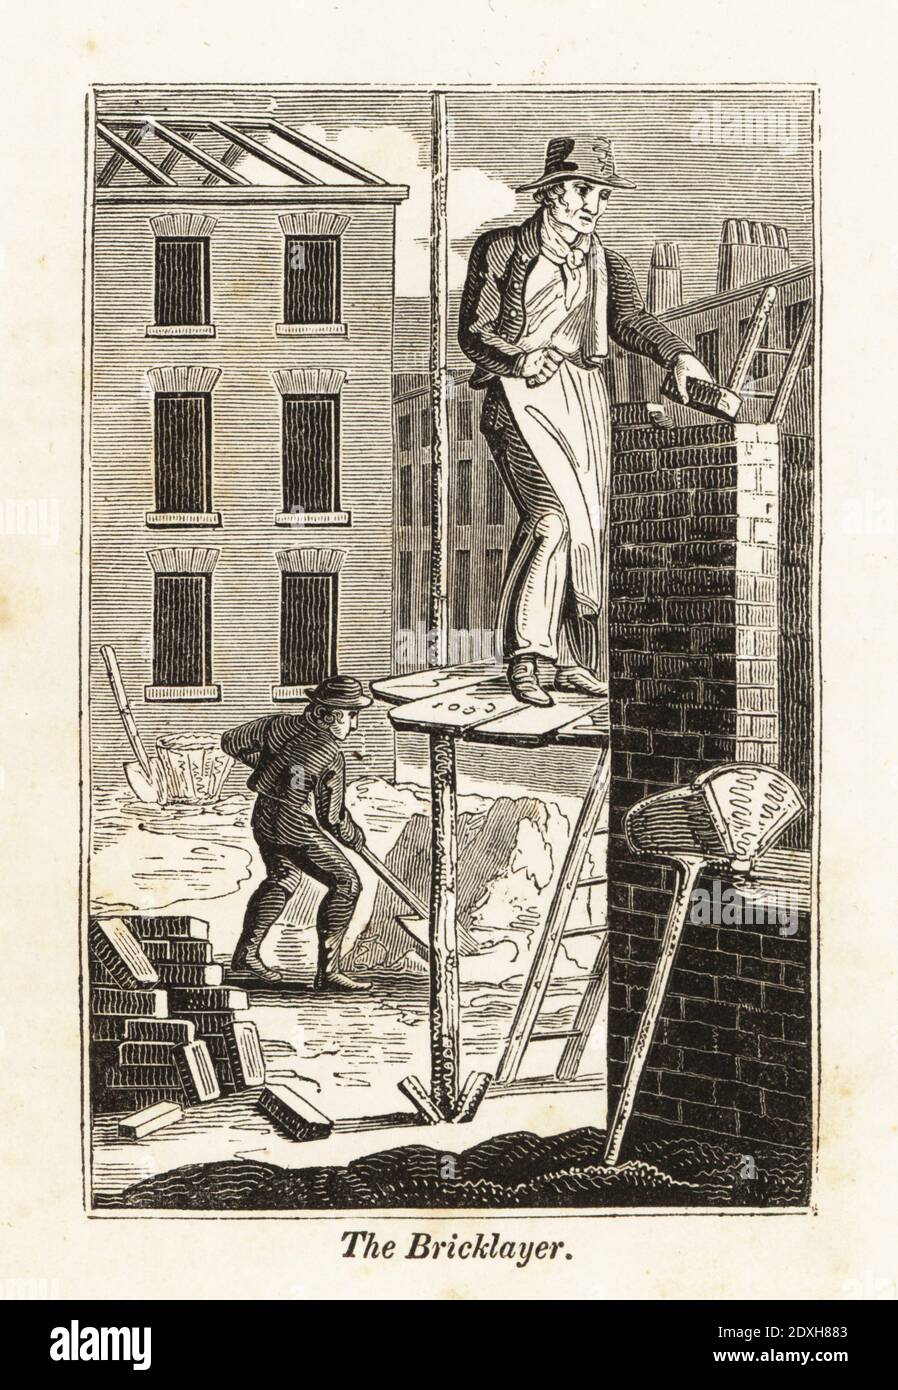 Bricklayer in apron and hat laying bricks with trowel and cement. He is standing on a platform on scaffolding, while a navvy shovels sand. Bricks, spade, shovel, hod, sand, cement on the building site. Woodblock engraving from The Book of English Trades, or Library of Useful Arts, F.C.& J. Rivington, London, 1821. Stock Photo